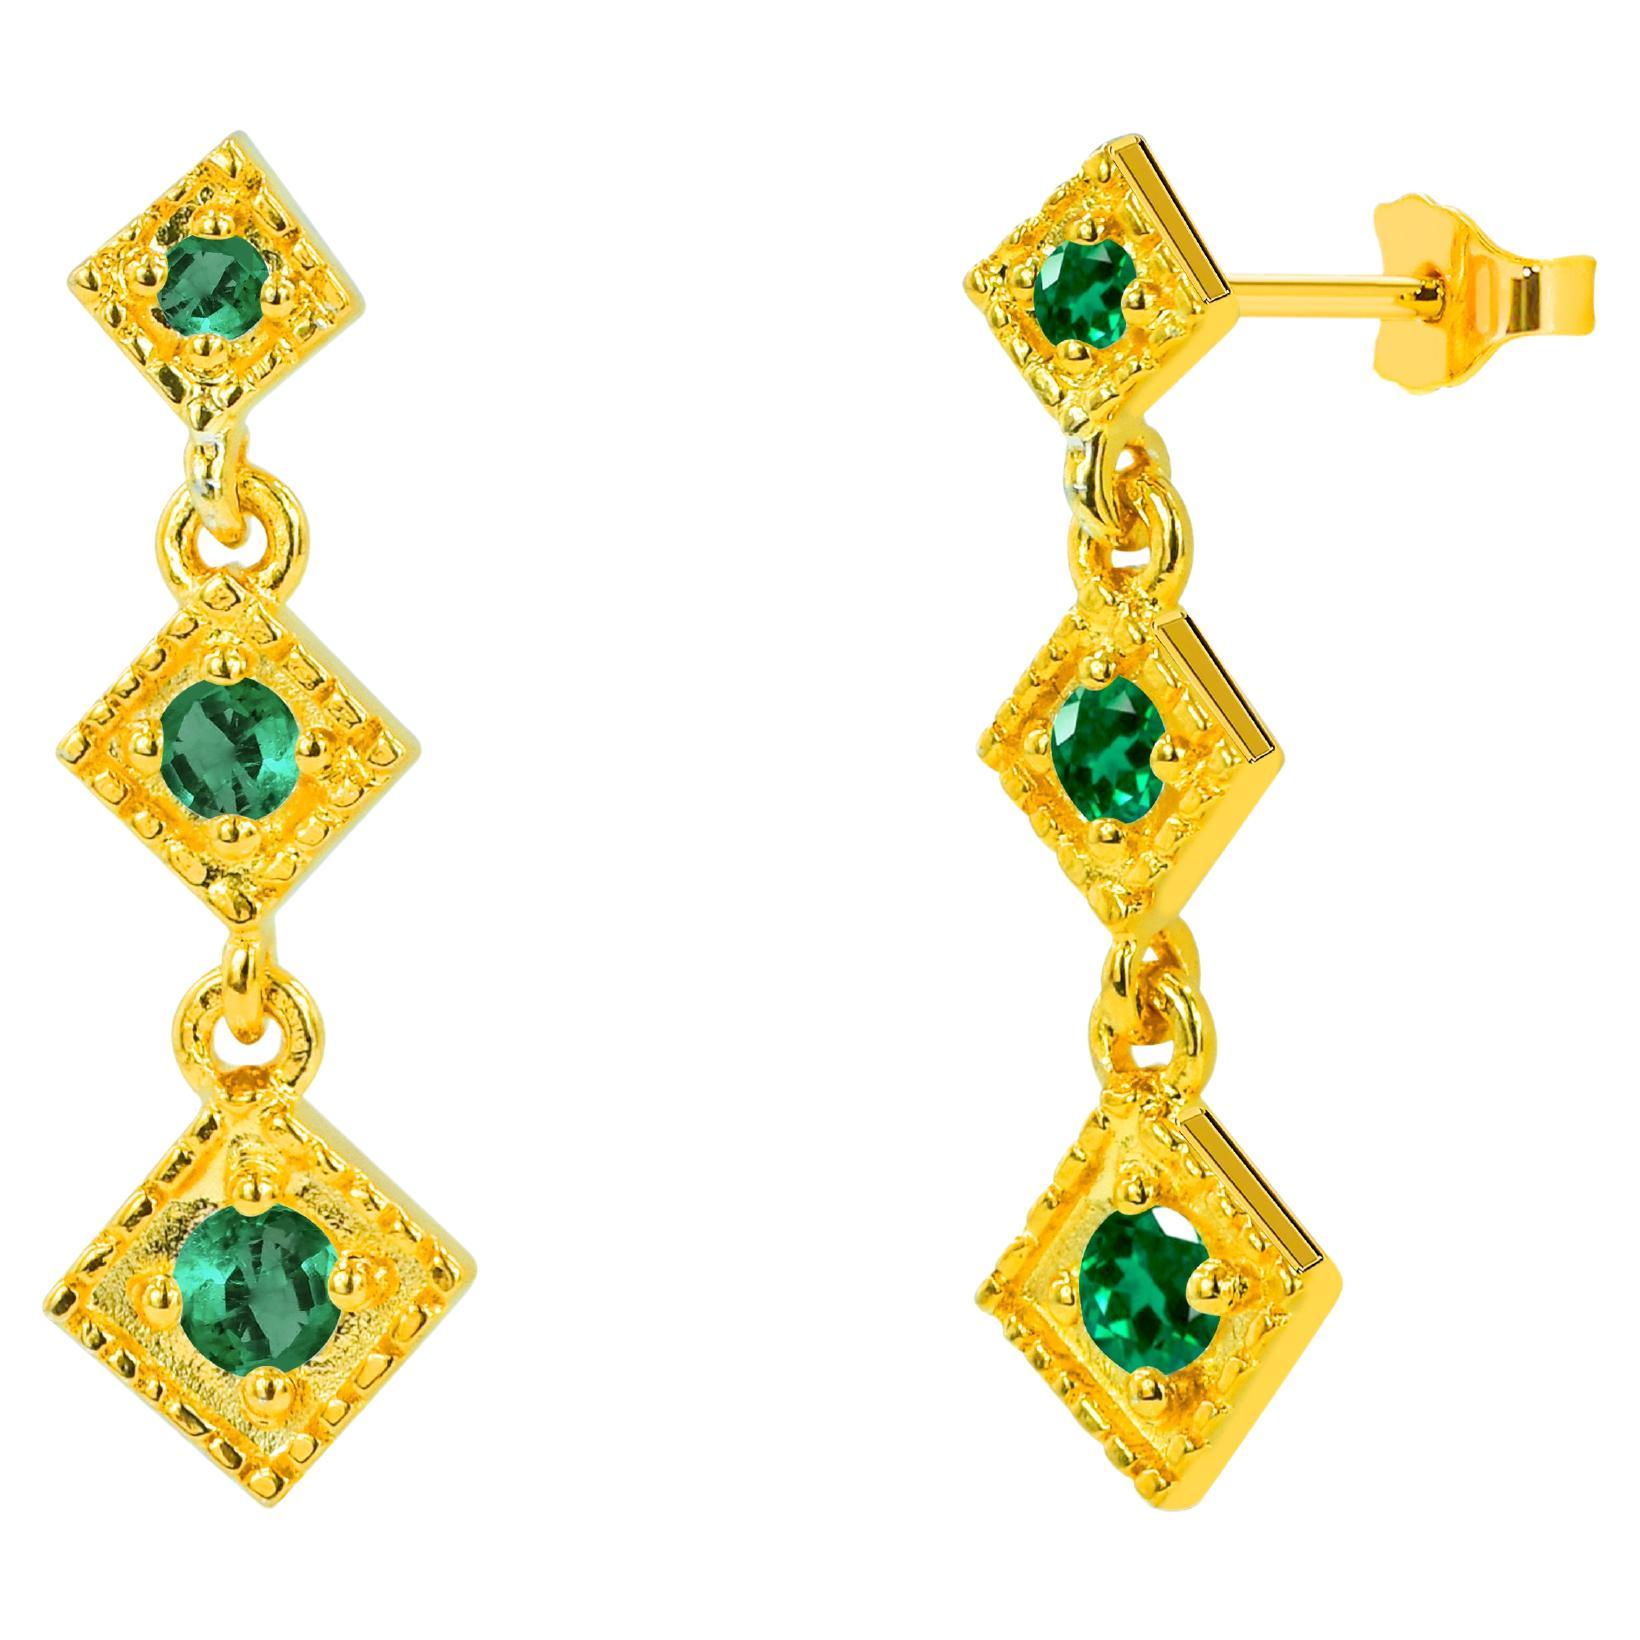 0.09 Ct Stone Emerald, Ruby and Sapphire Studs Earrings in 14K Gold